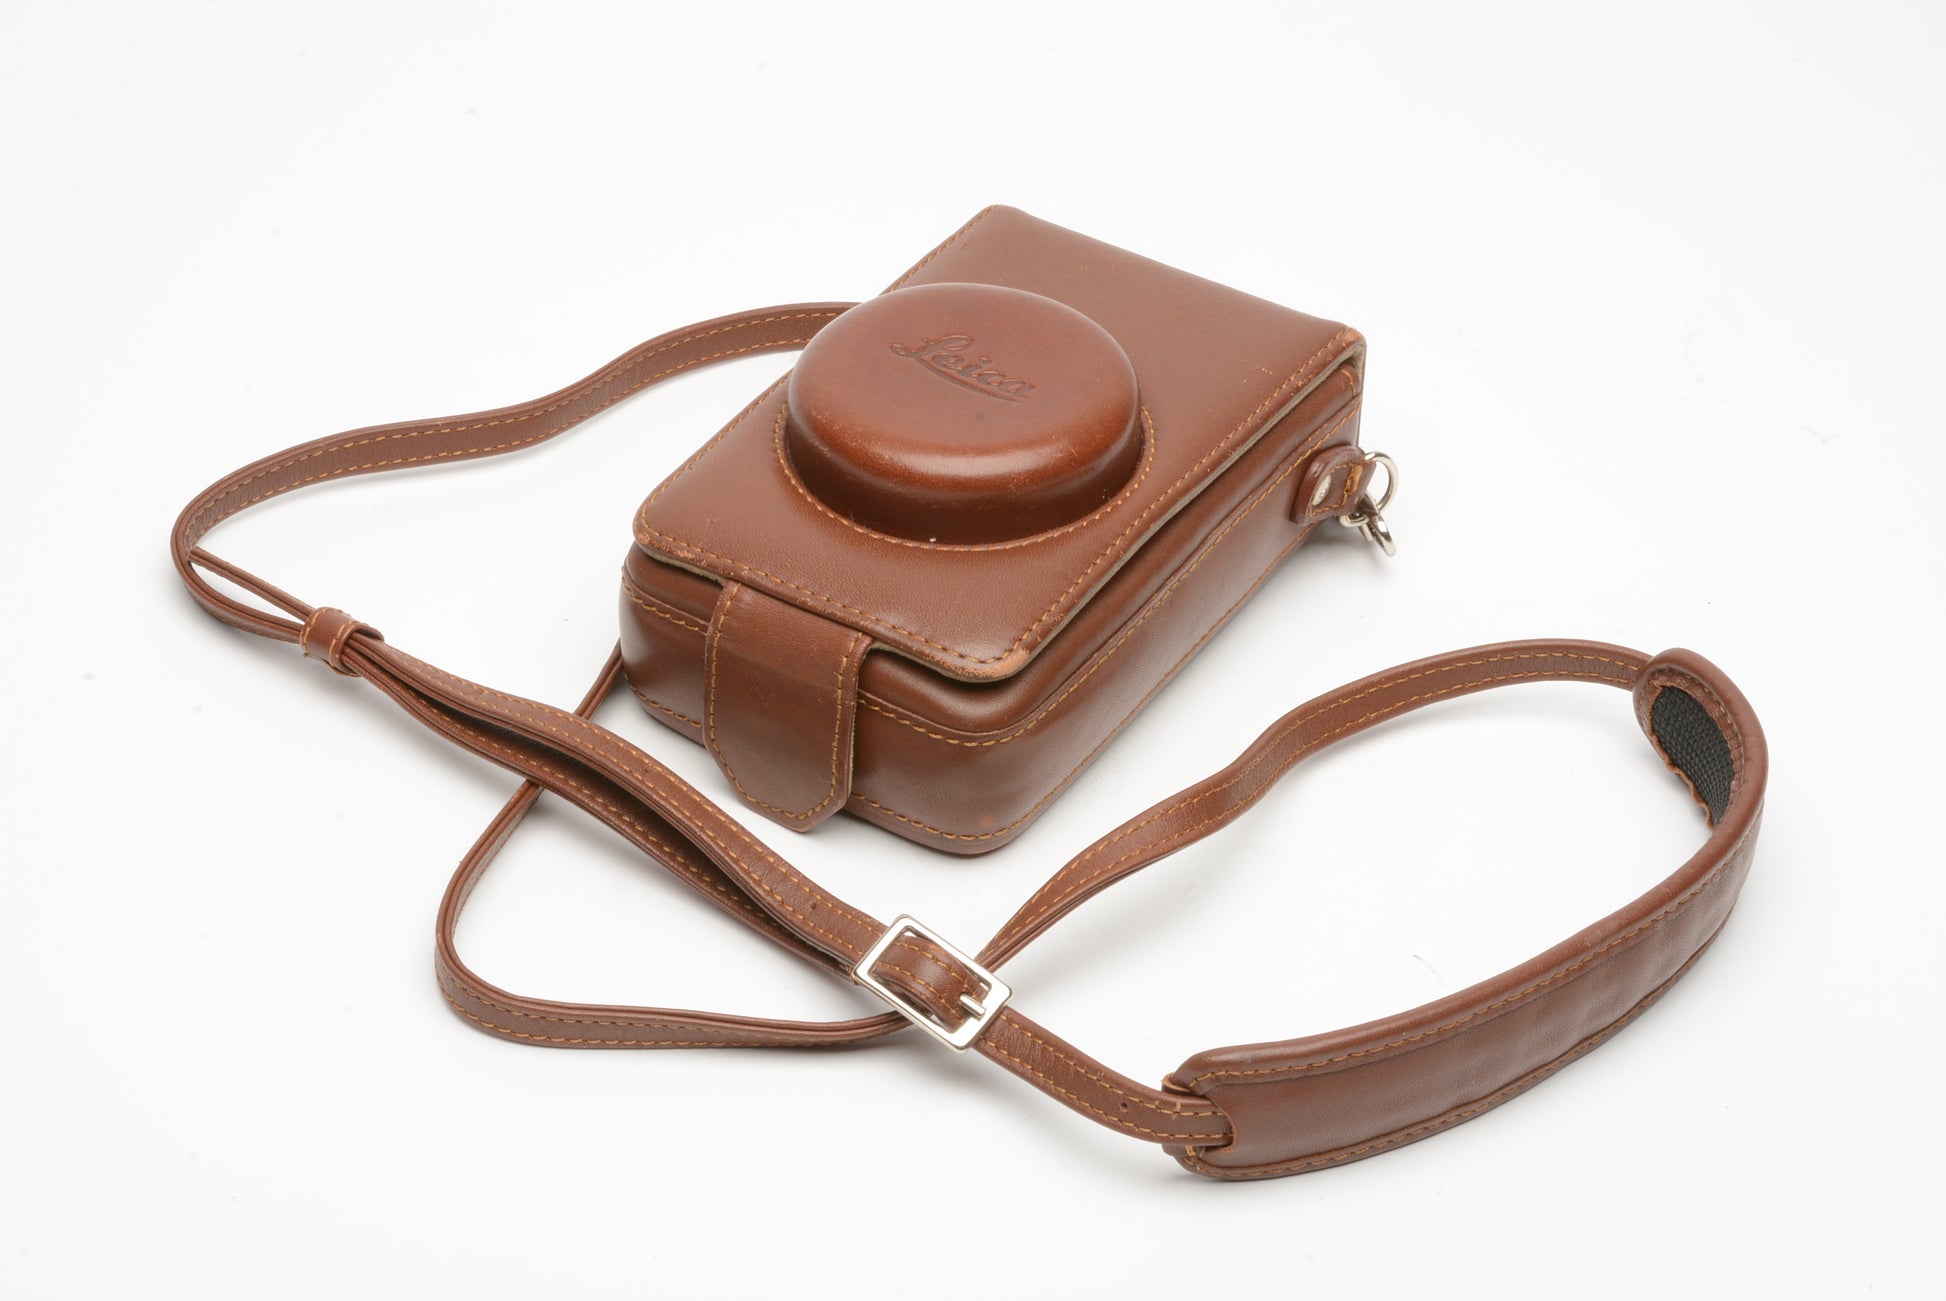 Leica leather D-Lux 4 Classic Case (Brown), very nice – RecycledPhoto